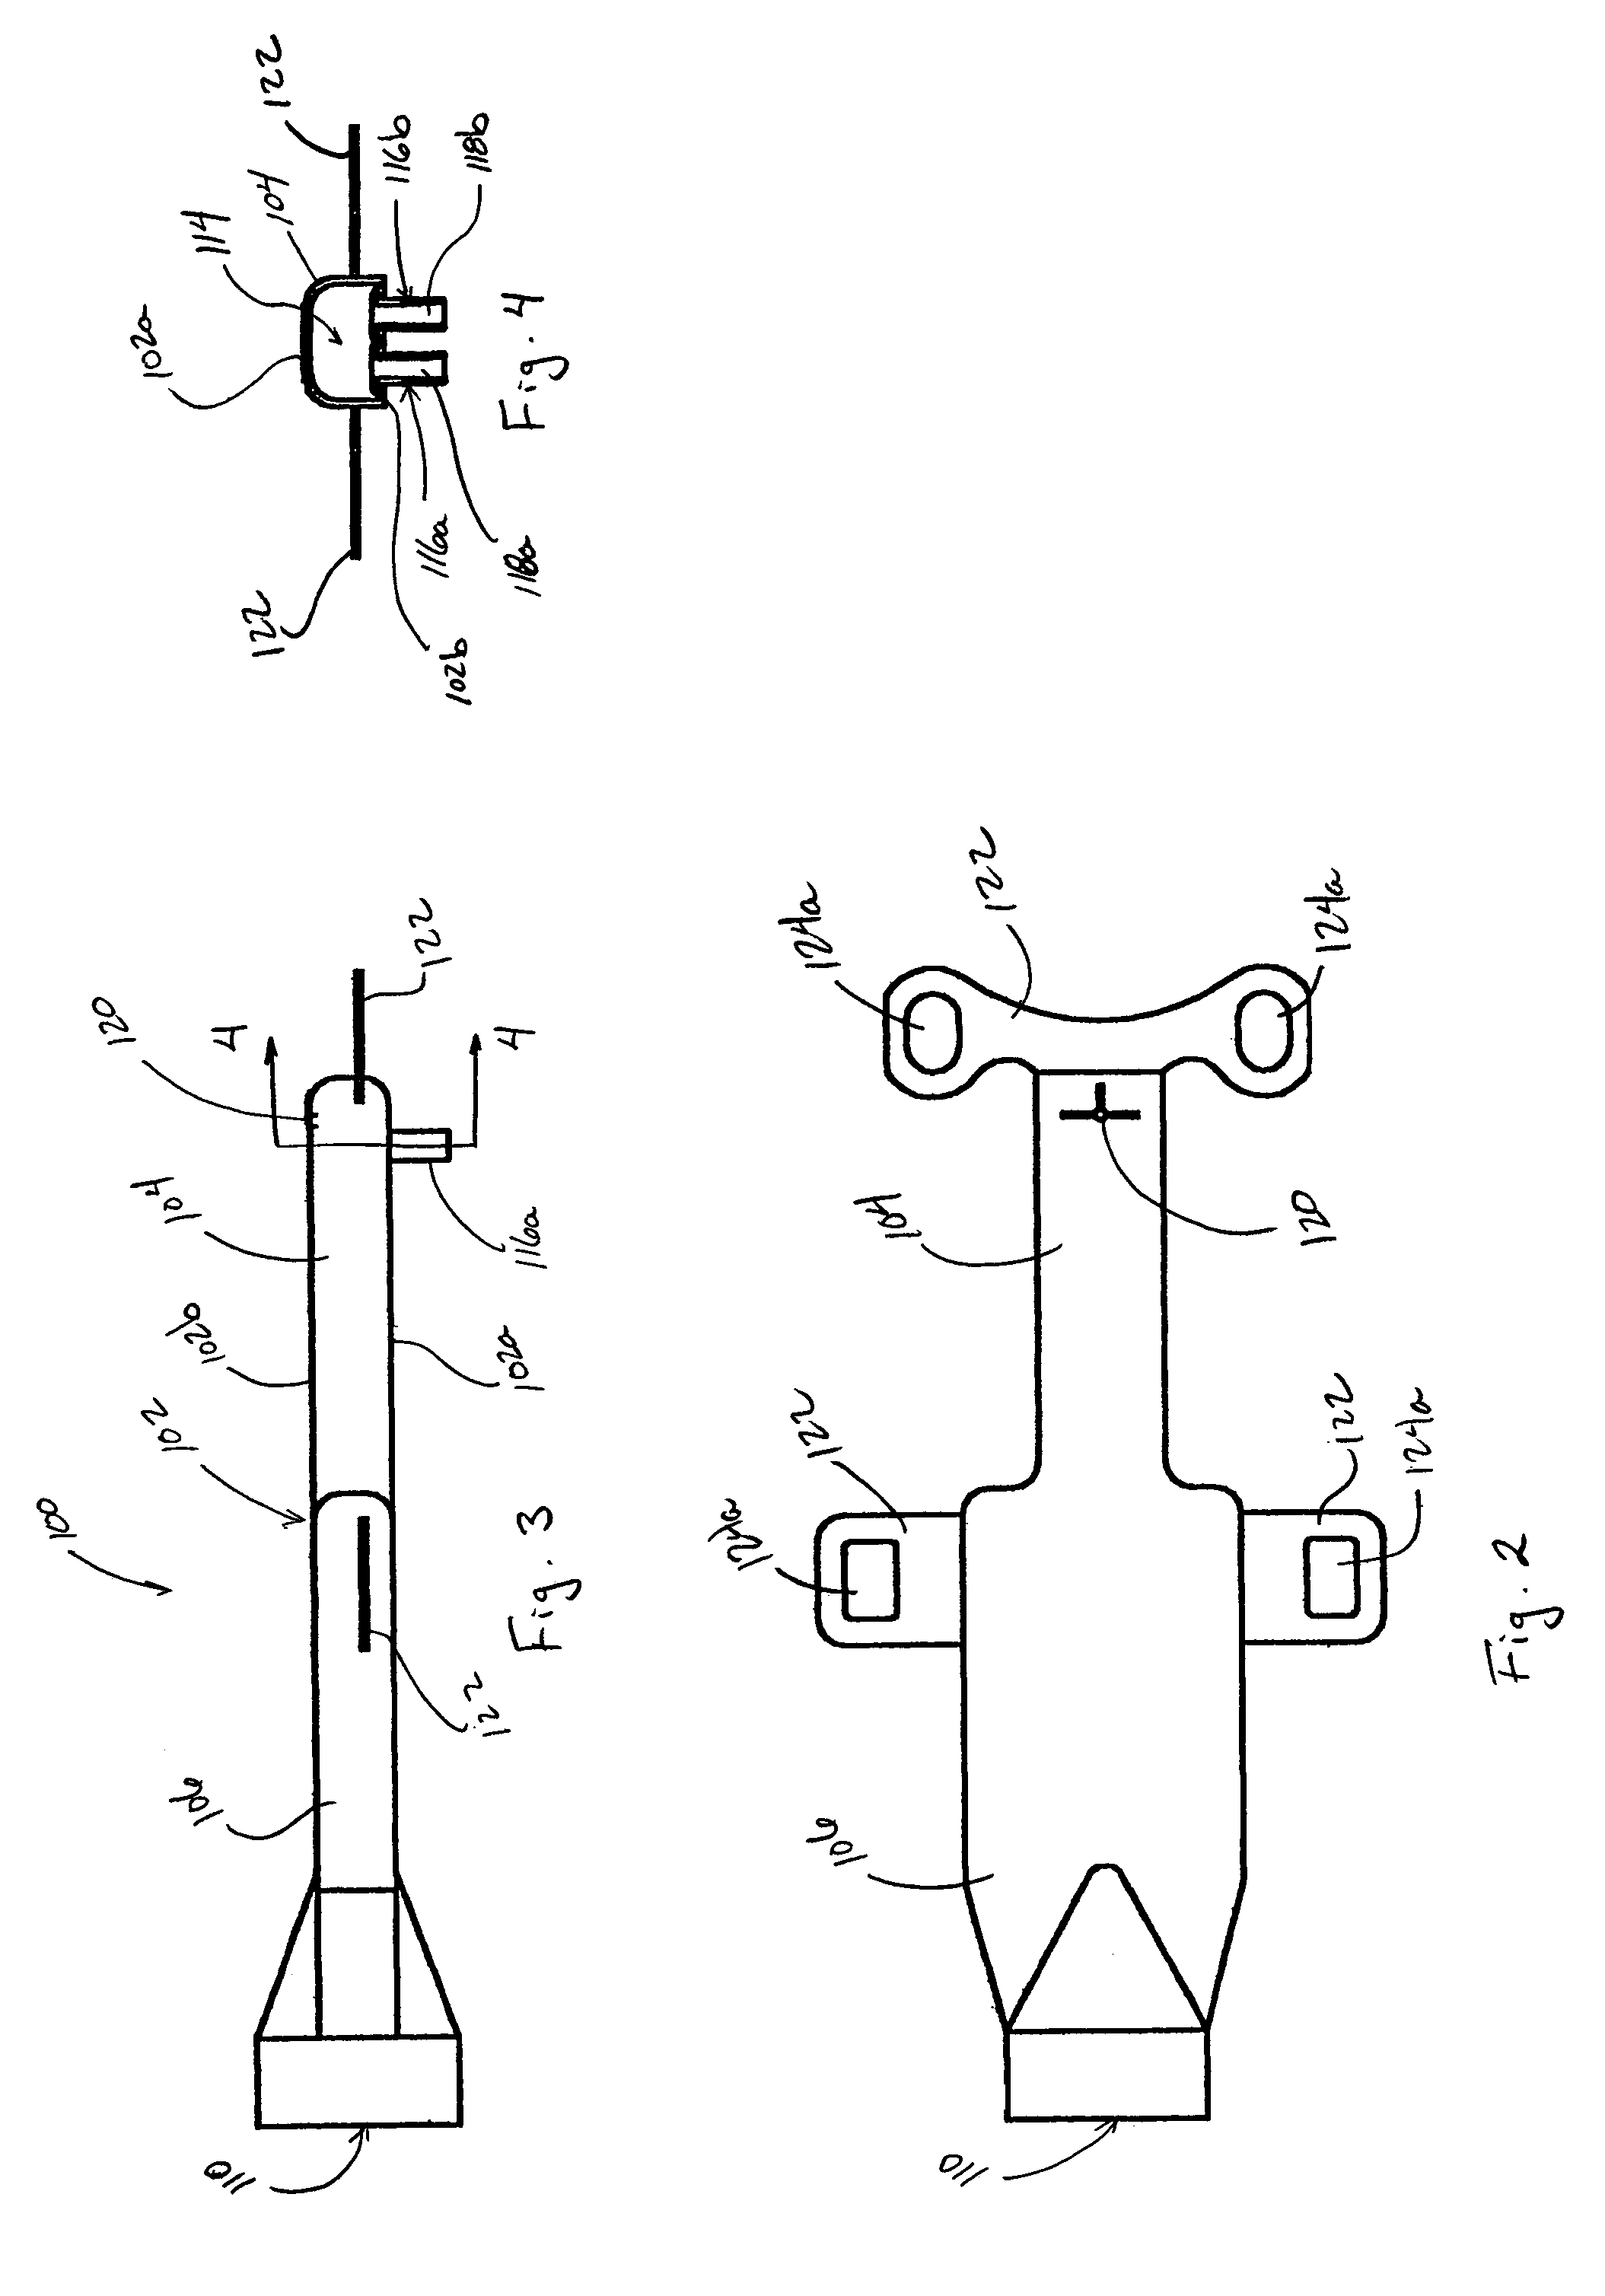 Dynamic infant nasal CPAP system and method